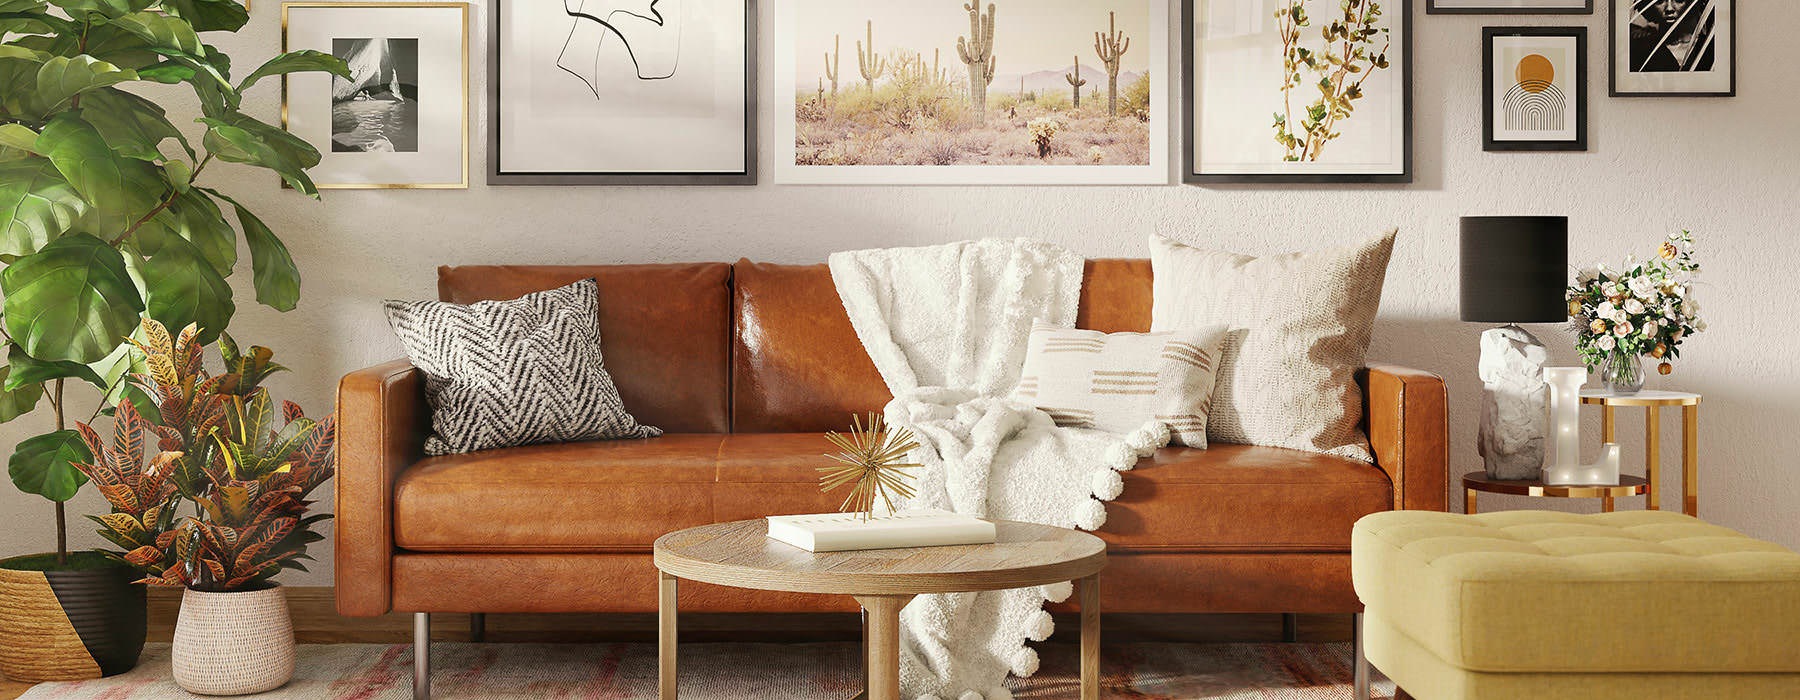 furnished living room stock photo